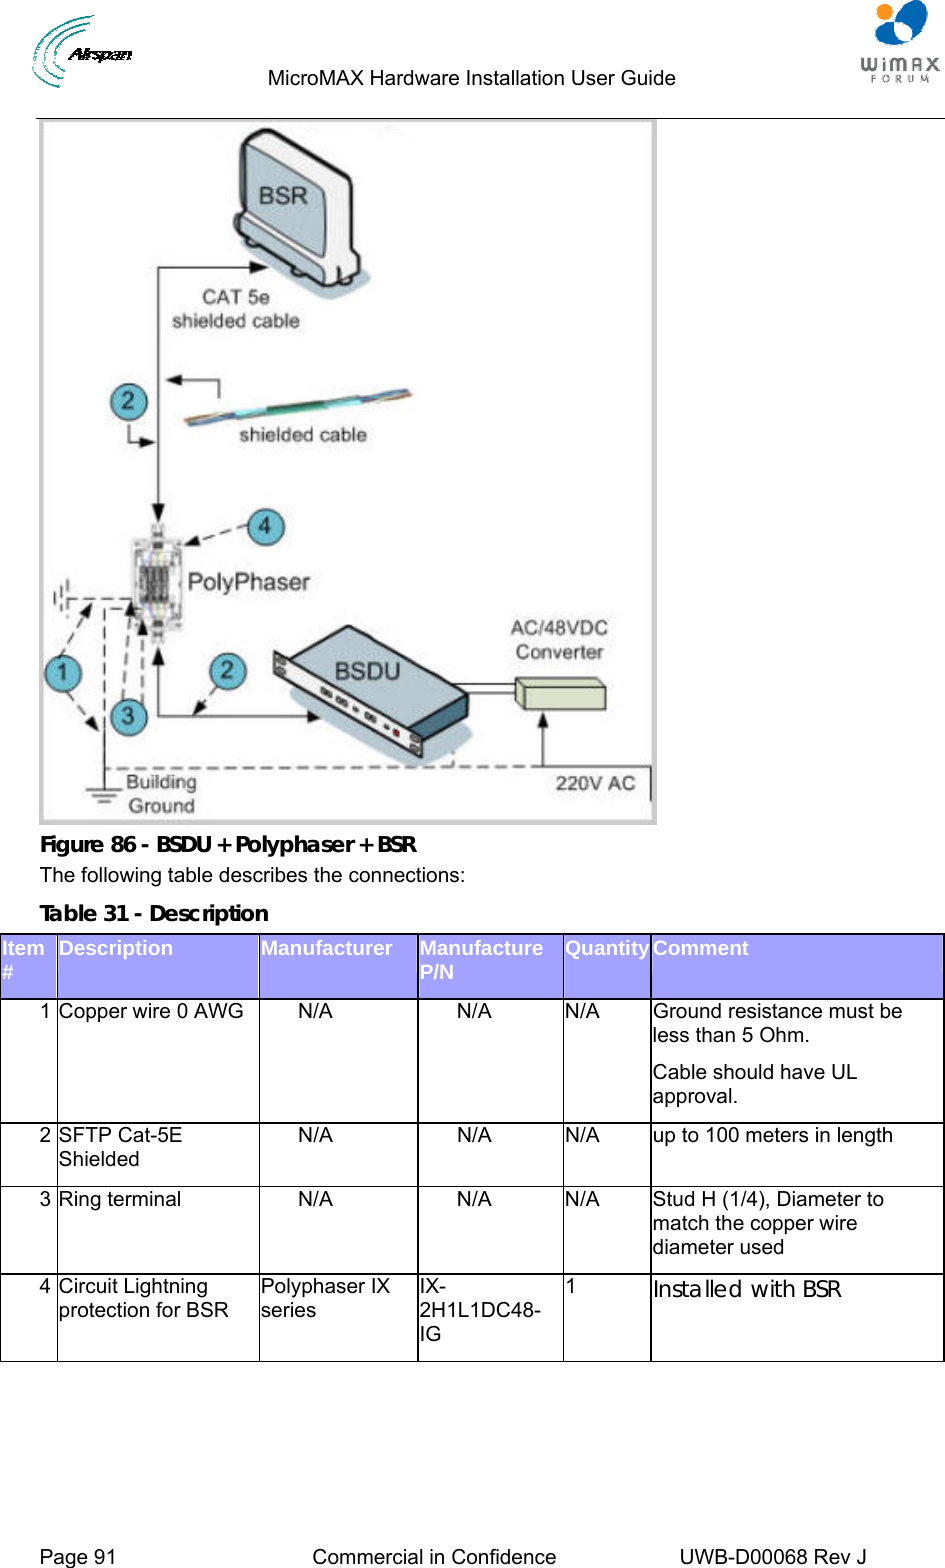                                  MicroMAX Hardware Installation User Guide     Page 91  Commercial in Confidence  UWB-D00068 Rev J    Figure 86 - BSDU + Polyphaser + BSR The following table describes the connections: Table 31 - Description Item #  Description  Manufacturer  Manufacture P/N  QuantityComment 1 Copper wire 0 AWG  N/A  N/A  N/A  Ground resistance must be less than 5 Ohm. Cable should have UL approval. 2 SFTP Cat-5E Shielded N/A  N/A  N/A  up to 100 meters in length 3 Ring terminal  N/A  N/A  N/A  Stud H (1/4), Diameter to match the copper wire diameter used 4 Circuit Lightning protection for BSR Polyphaser IX series IX-2H1L1DC48-IG 1  Installed with BSR  